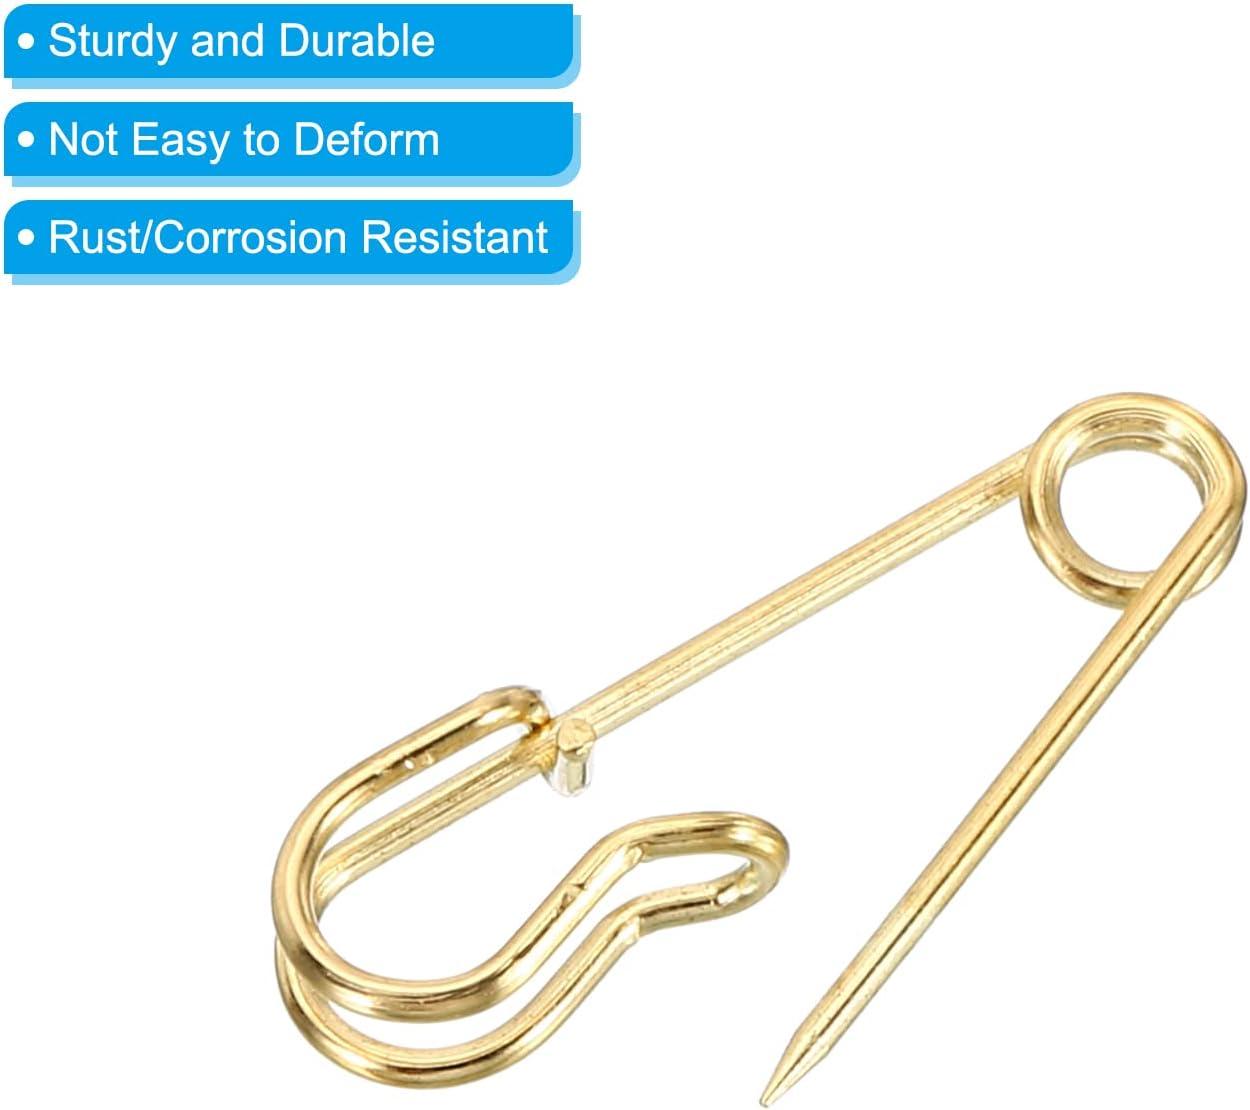 260 Pieces 6 Sizes Gold Safety Pins Large and Small Safety Pins Durable,  Rust-Resistant for Art Craft Sewing Jewelry Making Home Office Use